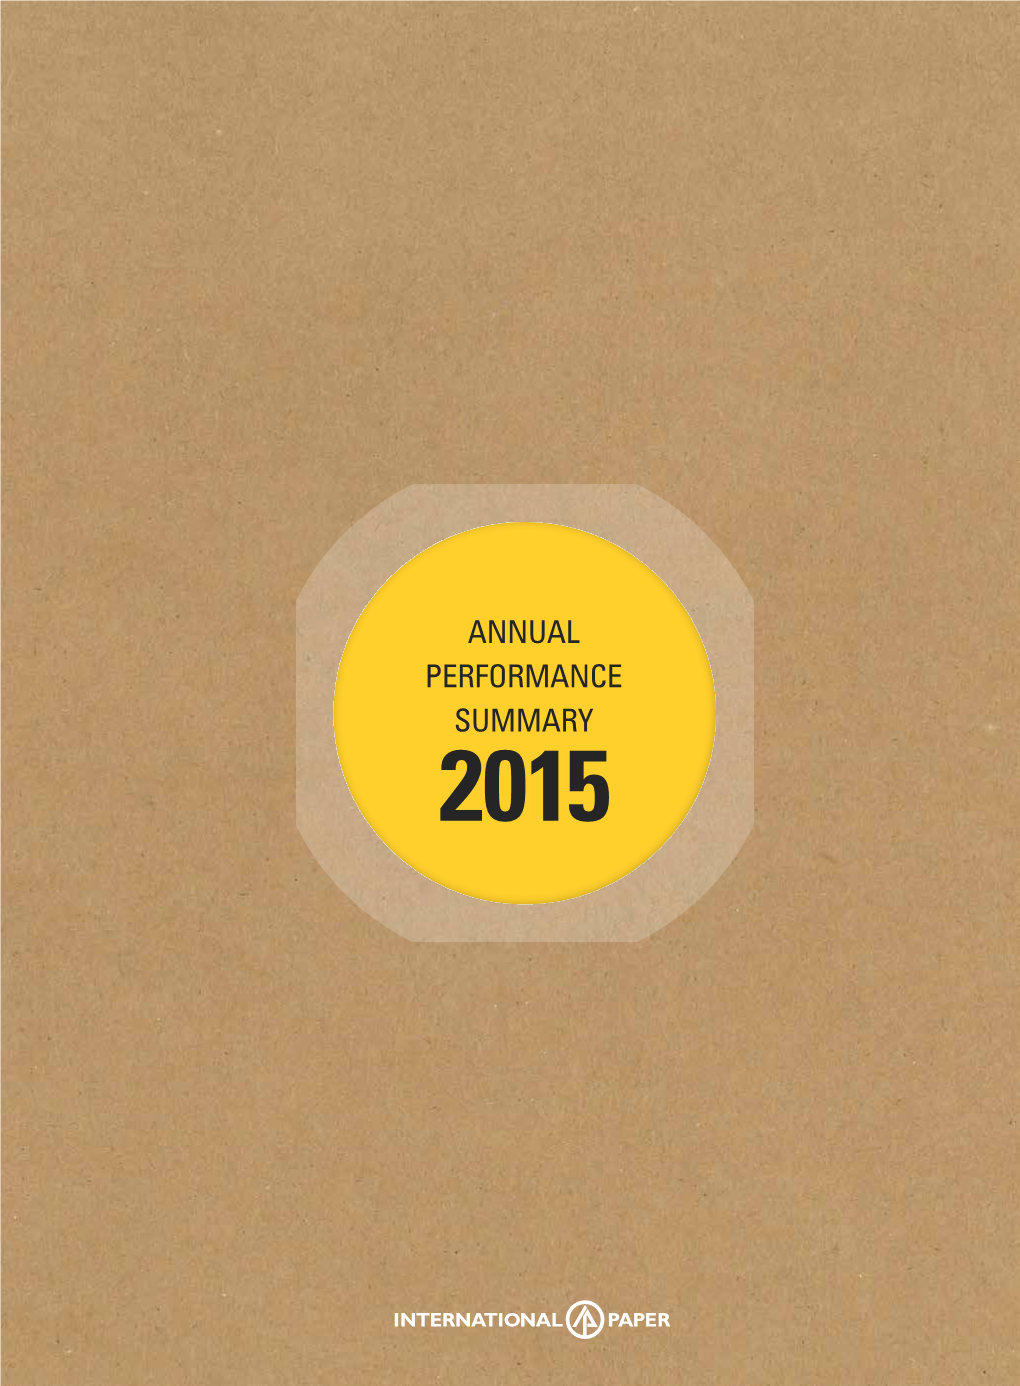 Annual Performance Summary 2015 Track Record of Strong Performance